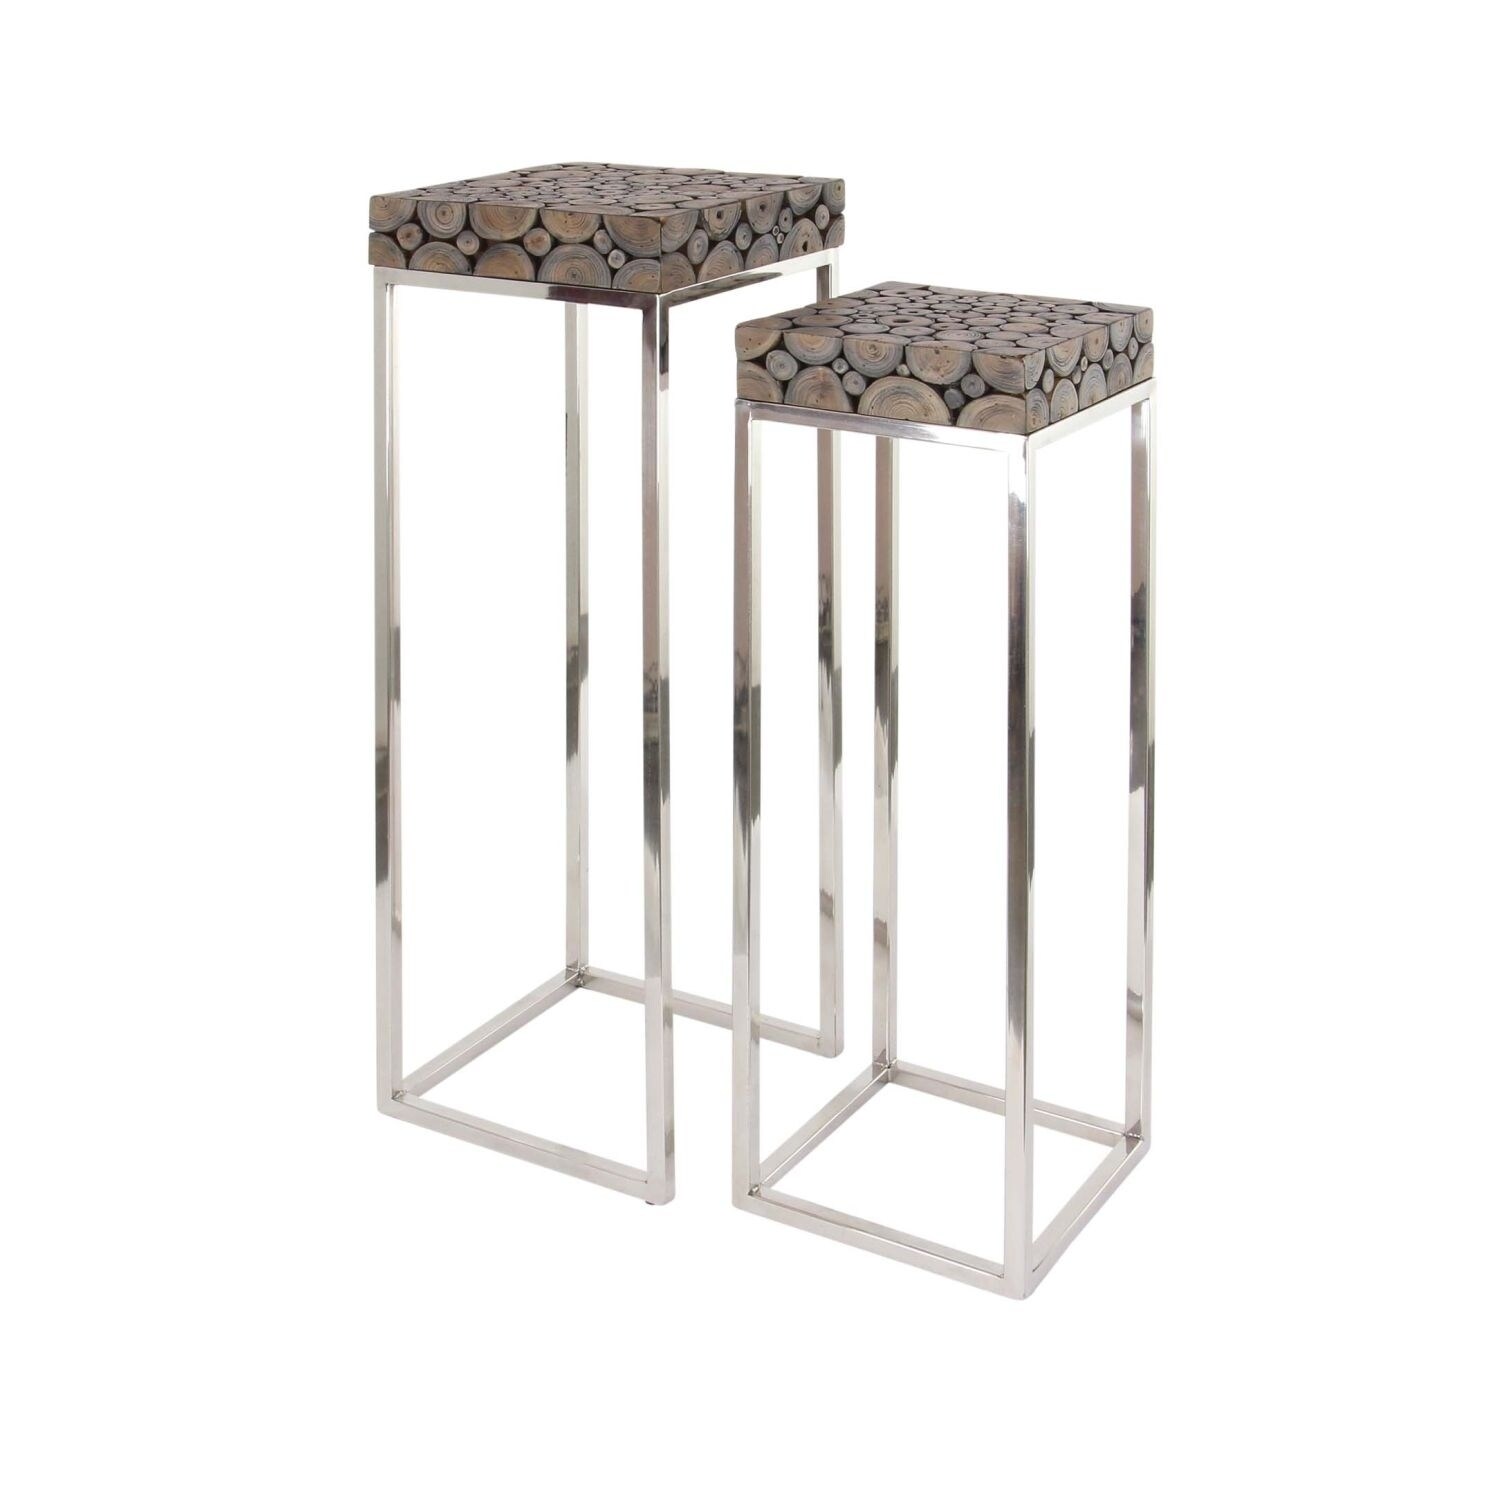 Shop Set of 2 Modern Wood and Stainless Steel Pedestals by Studio 350 ...